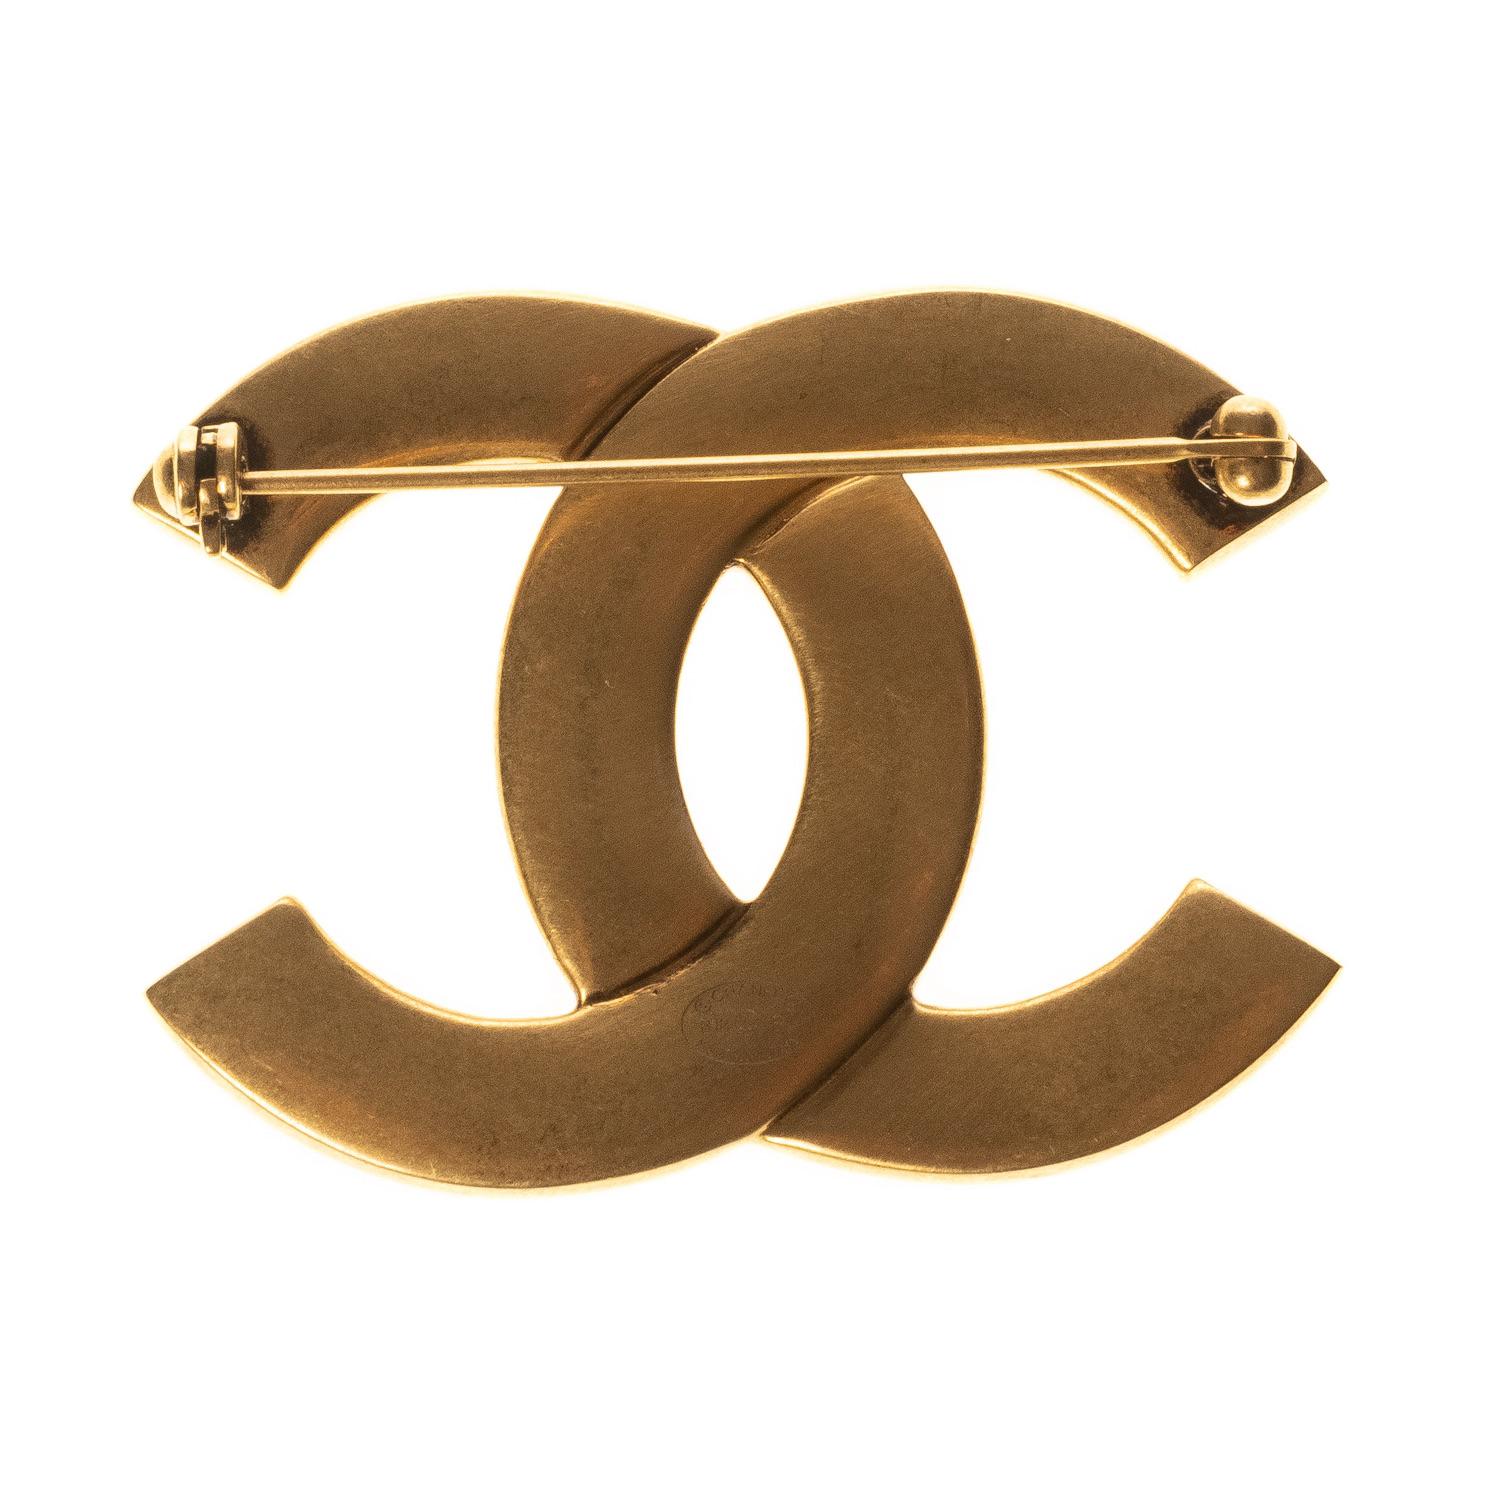 Chanel CC Gold Brooch, from the 2018 collection. Intricate design on the logo, featuring a pin on the back, all in very good condition.

COLOR: Gold
MATERIAL: Metal
ITEM CODE: B18 8
MEASURES: H 1.5” x L 2”
COMES WITH: Chanel box.
CONDITION: Very